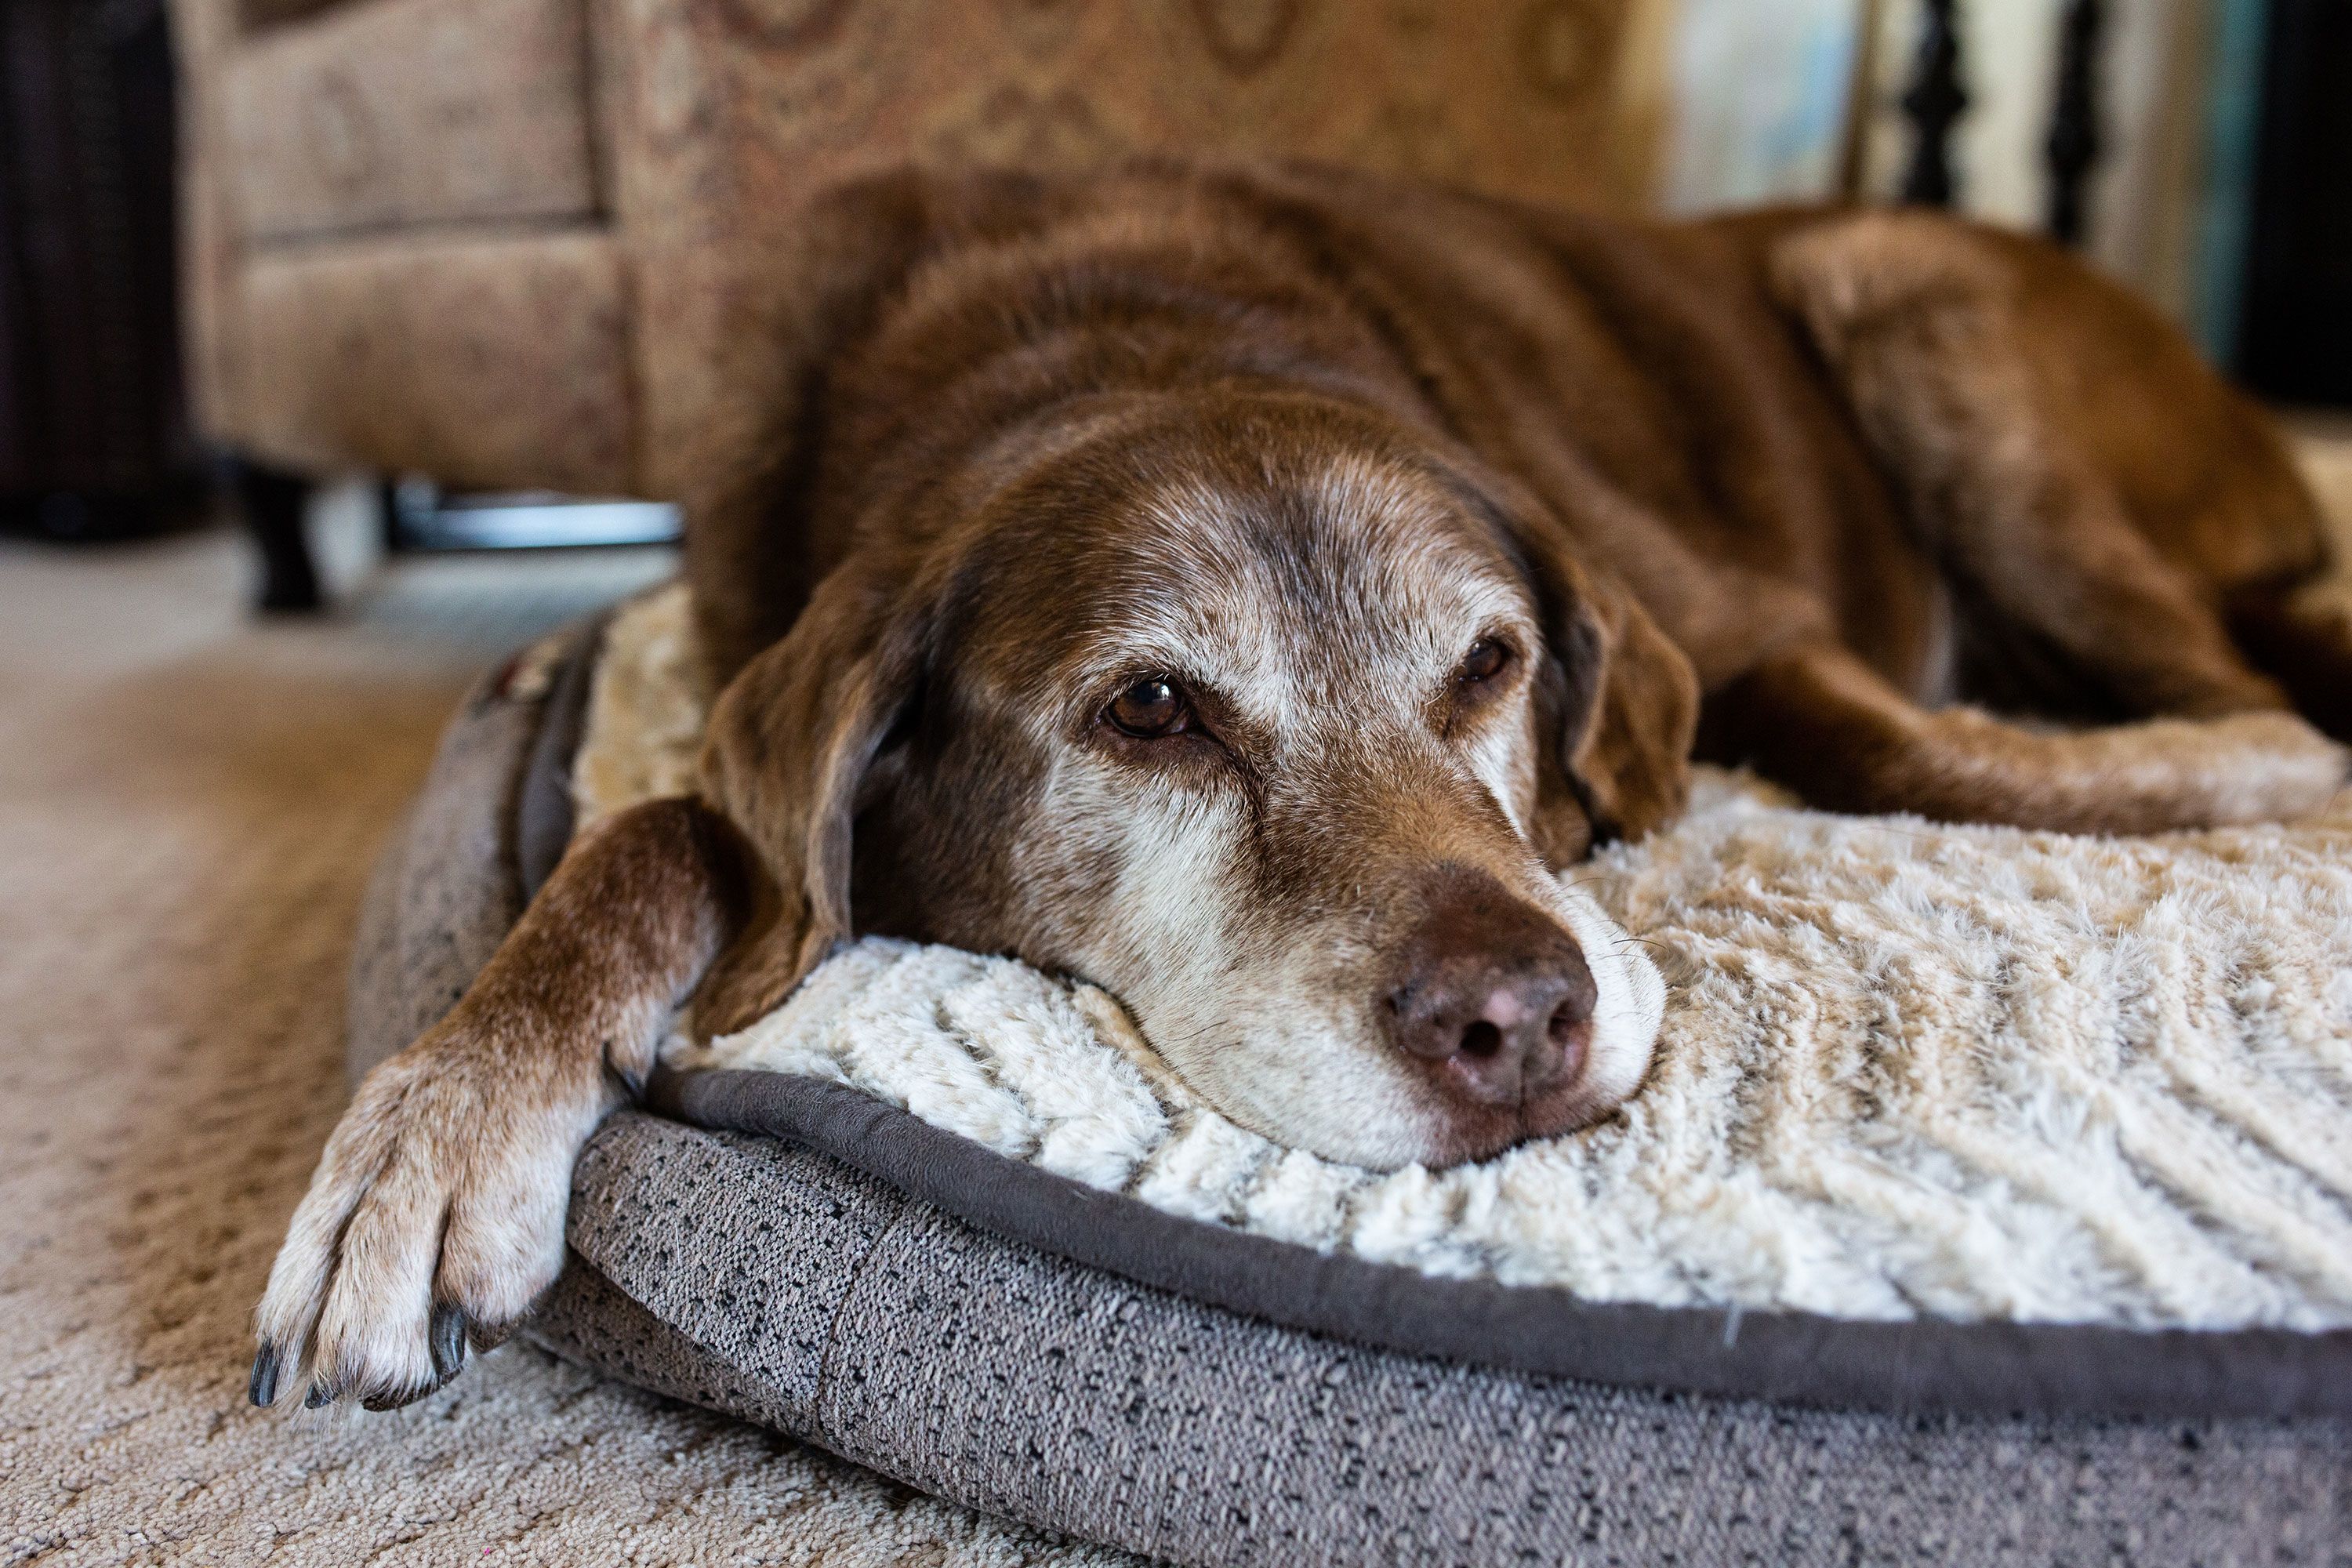 Dementia and Senility in Dogs